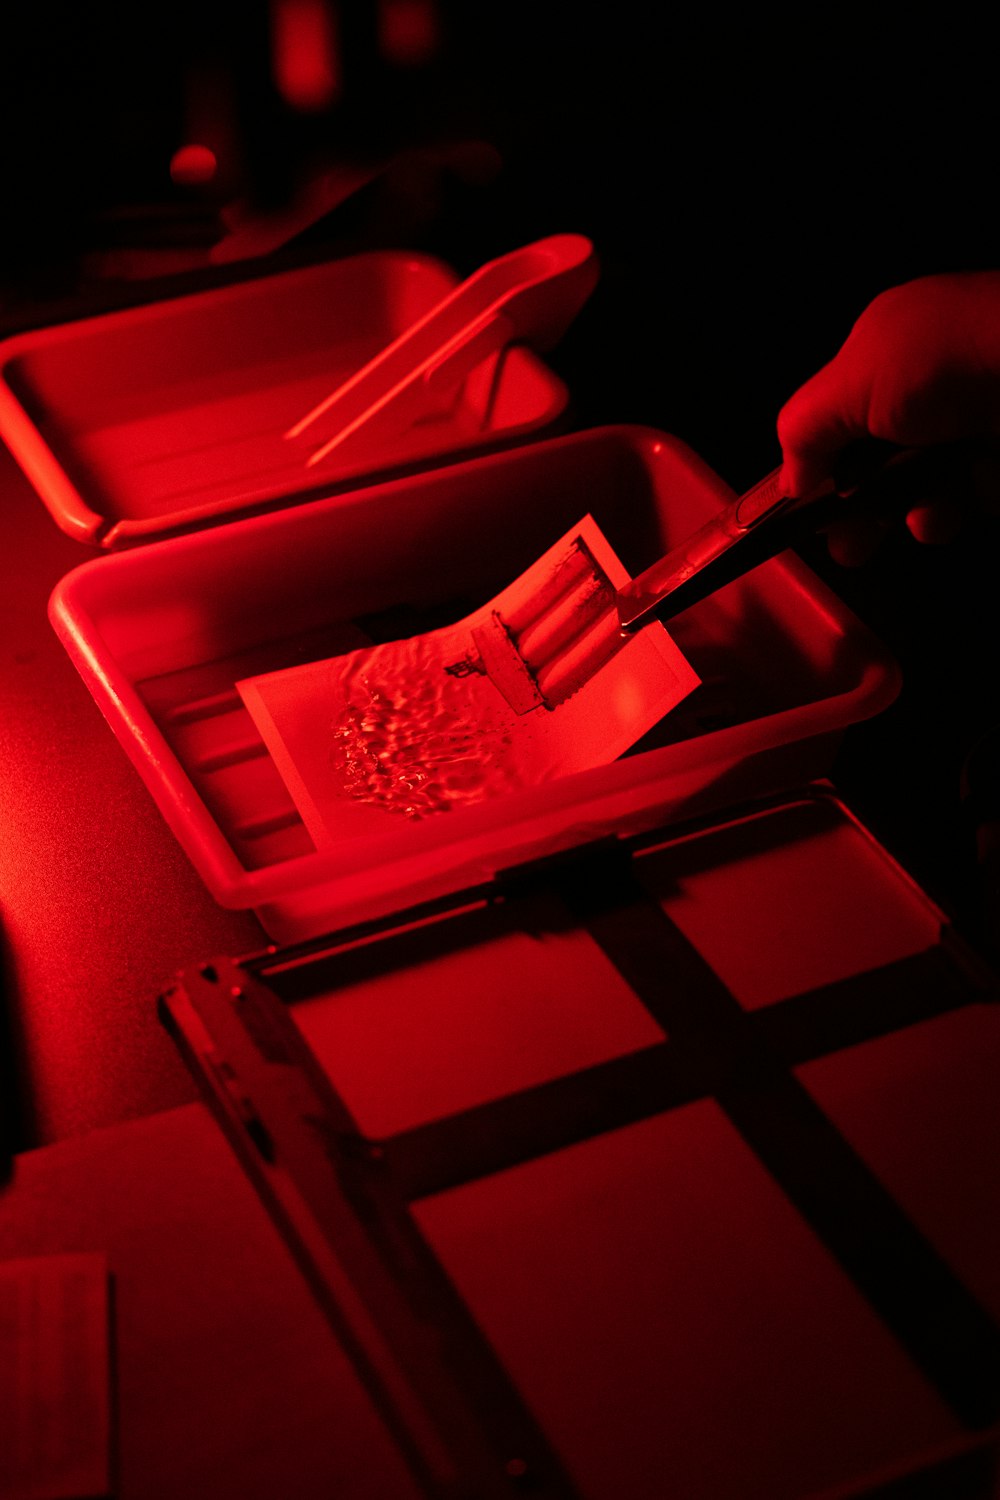 a red light is shining on a tray of food